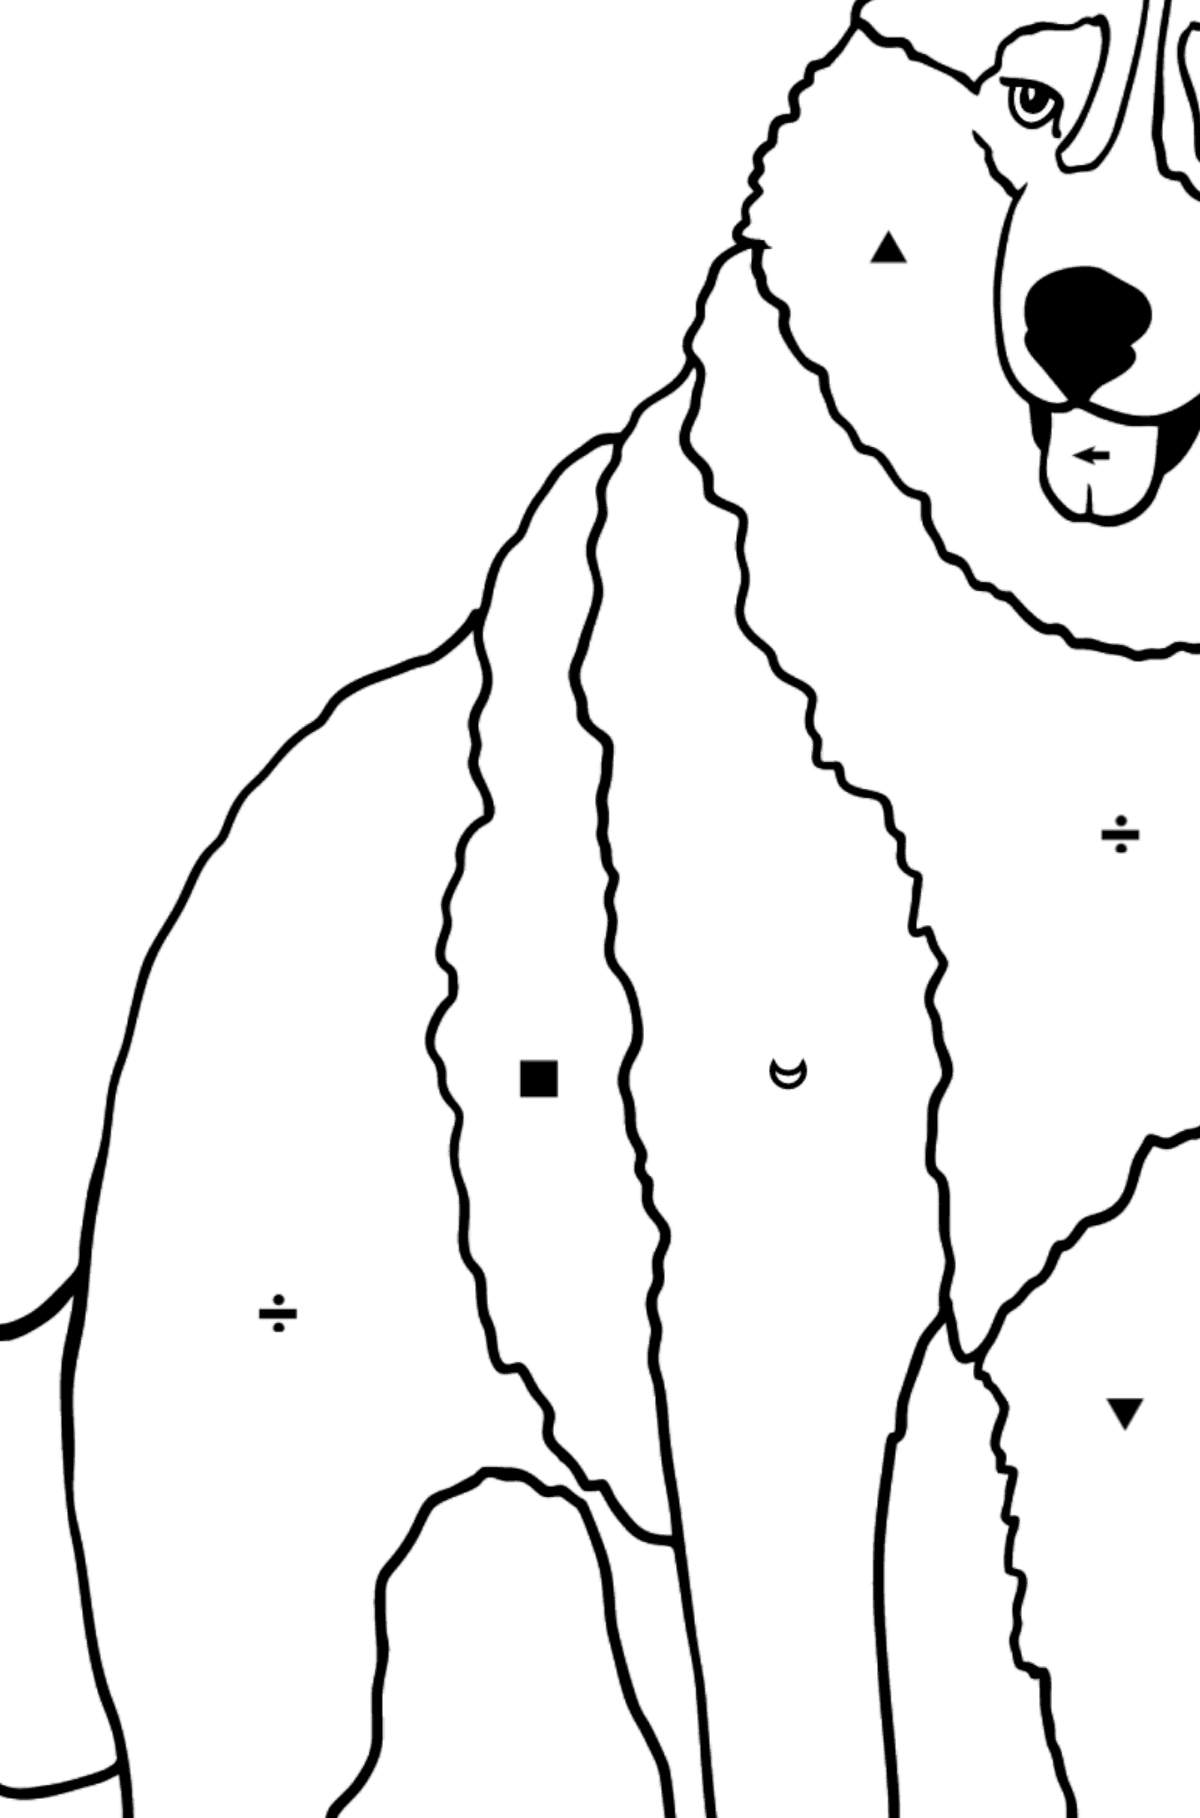 Husky coloring page - Coloring by Symbols for Kids